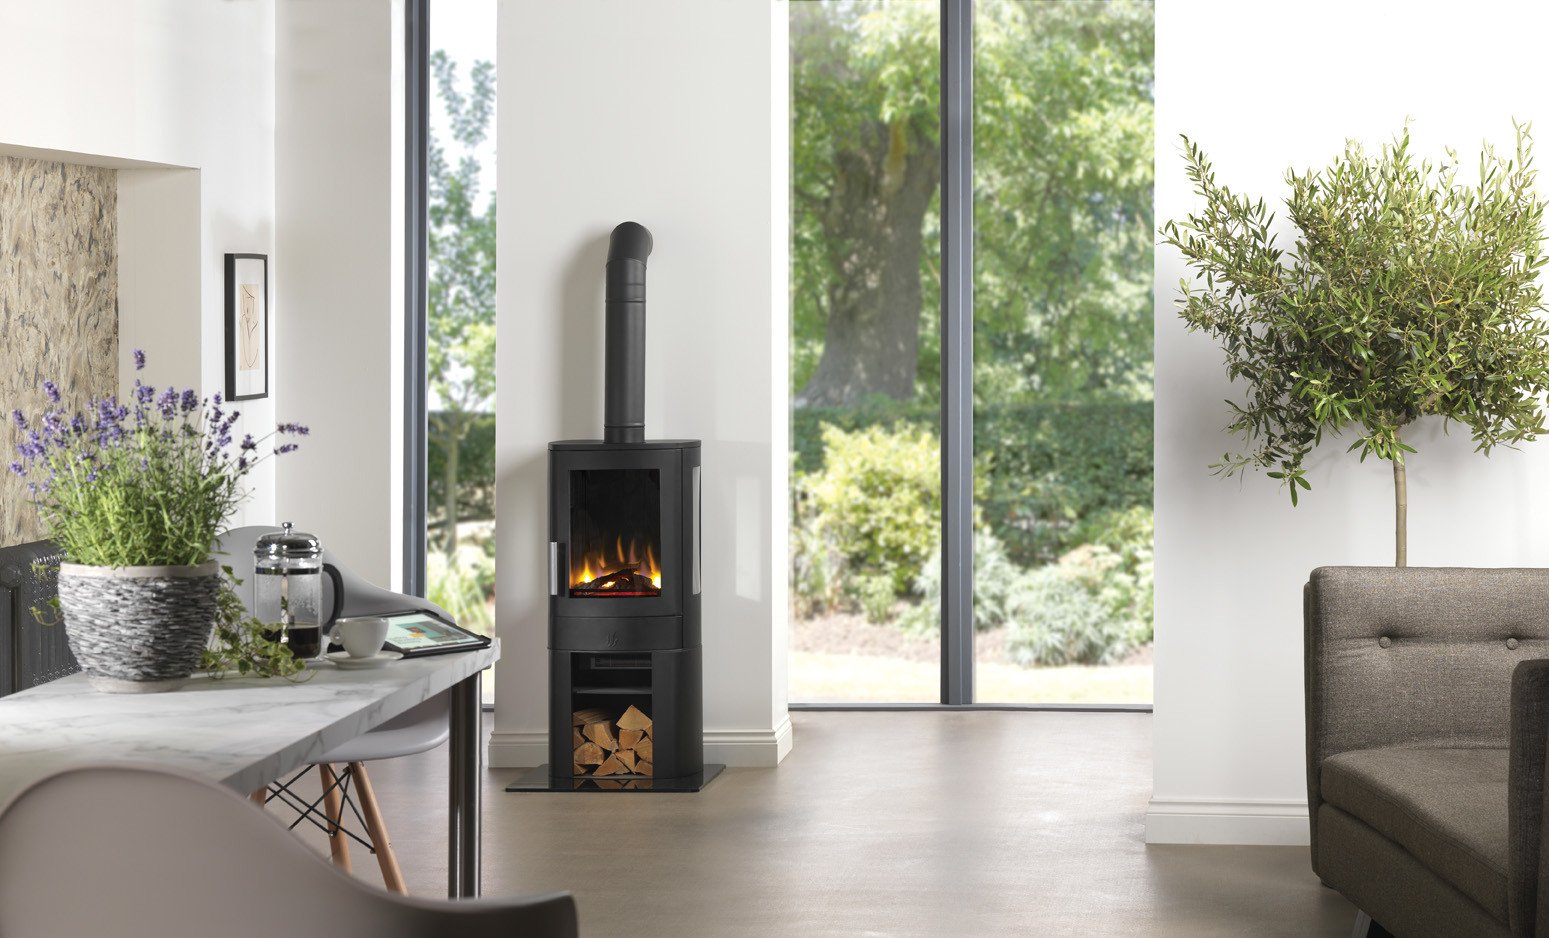 ACR NEO 3CE Electric Stove